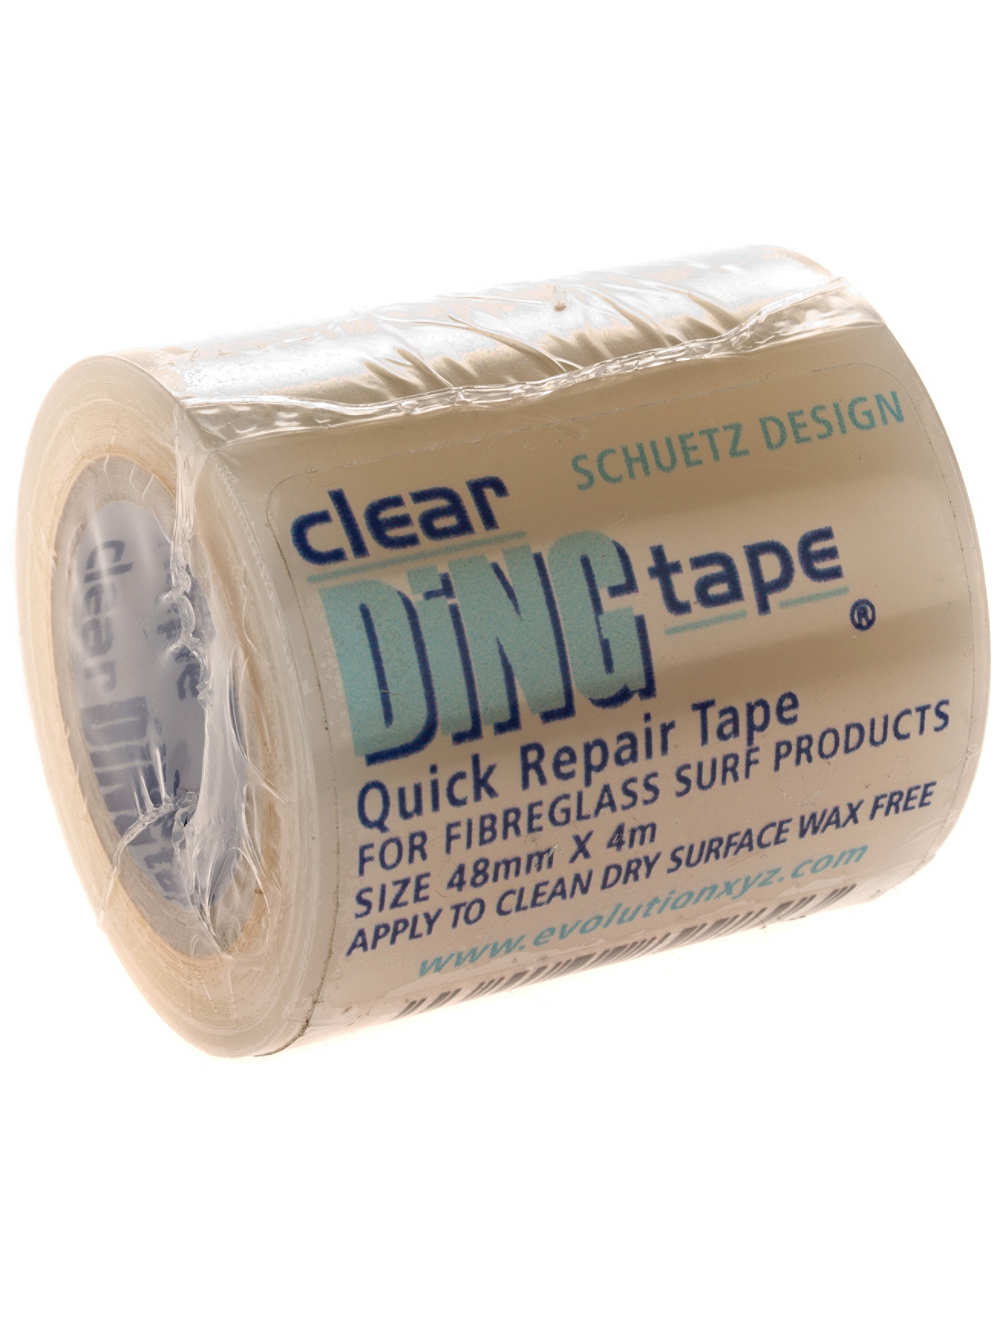 Northcore Ding Repair Tape